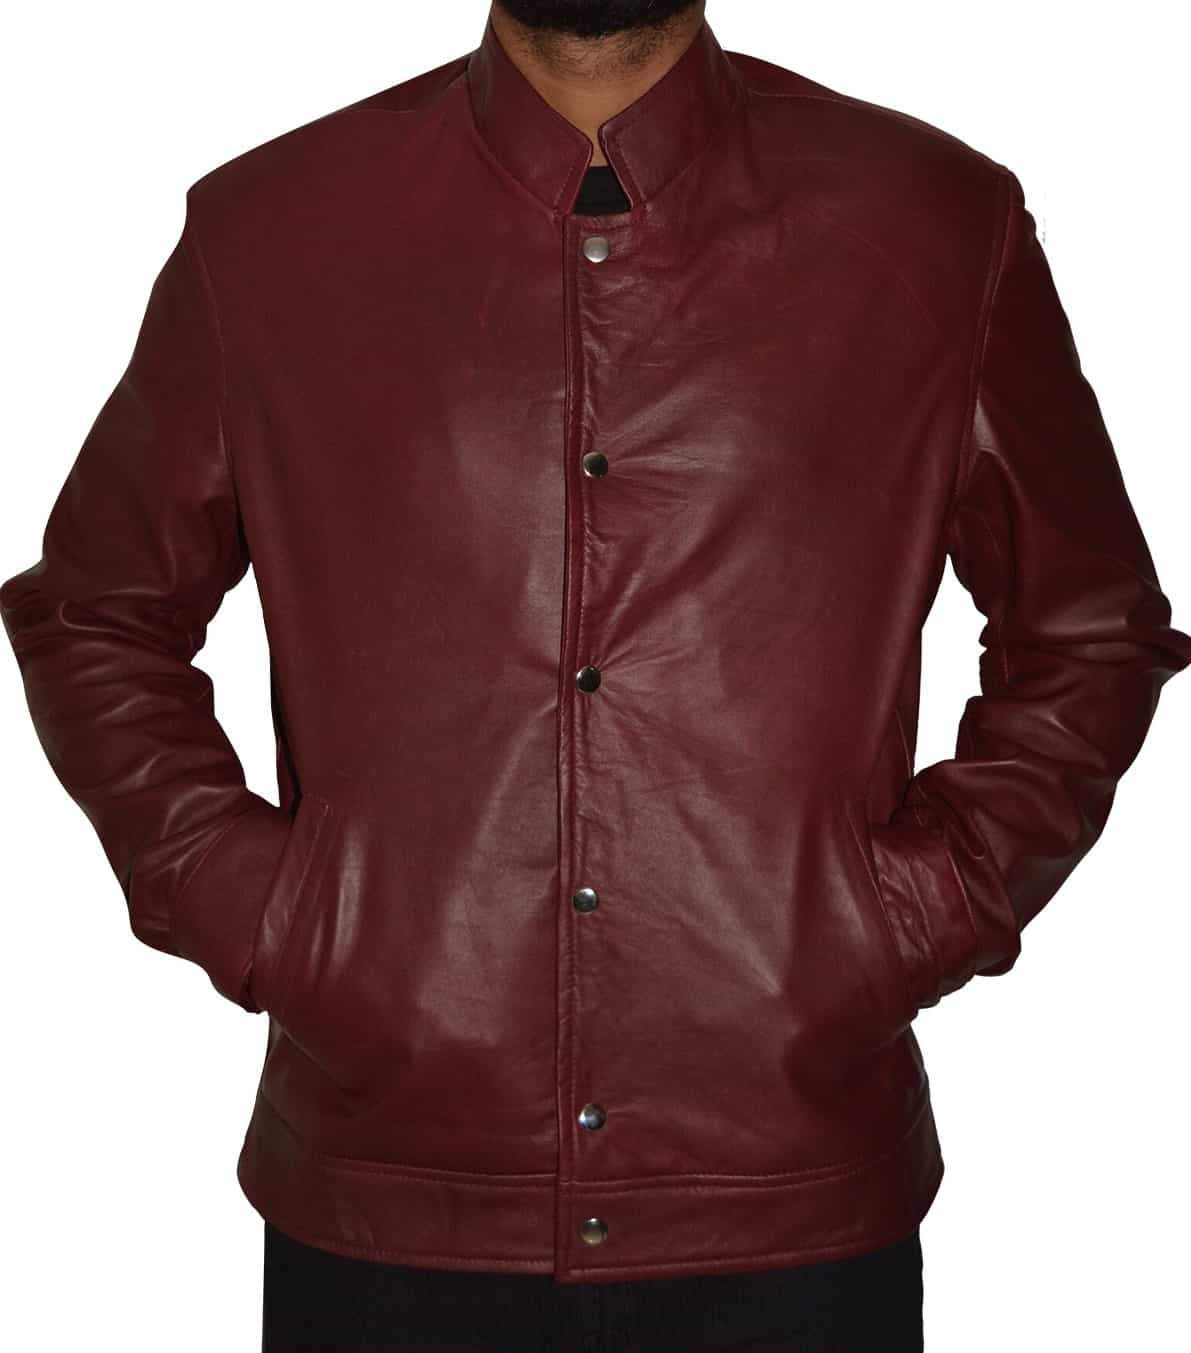 Vin Diesel Fast and Furious 7 Leather jacket